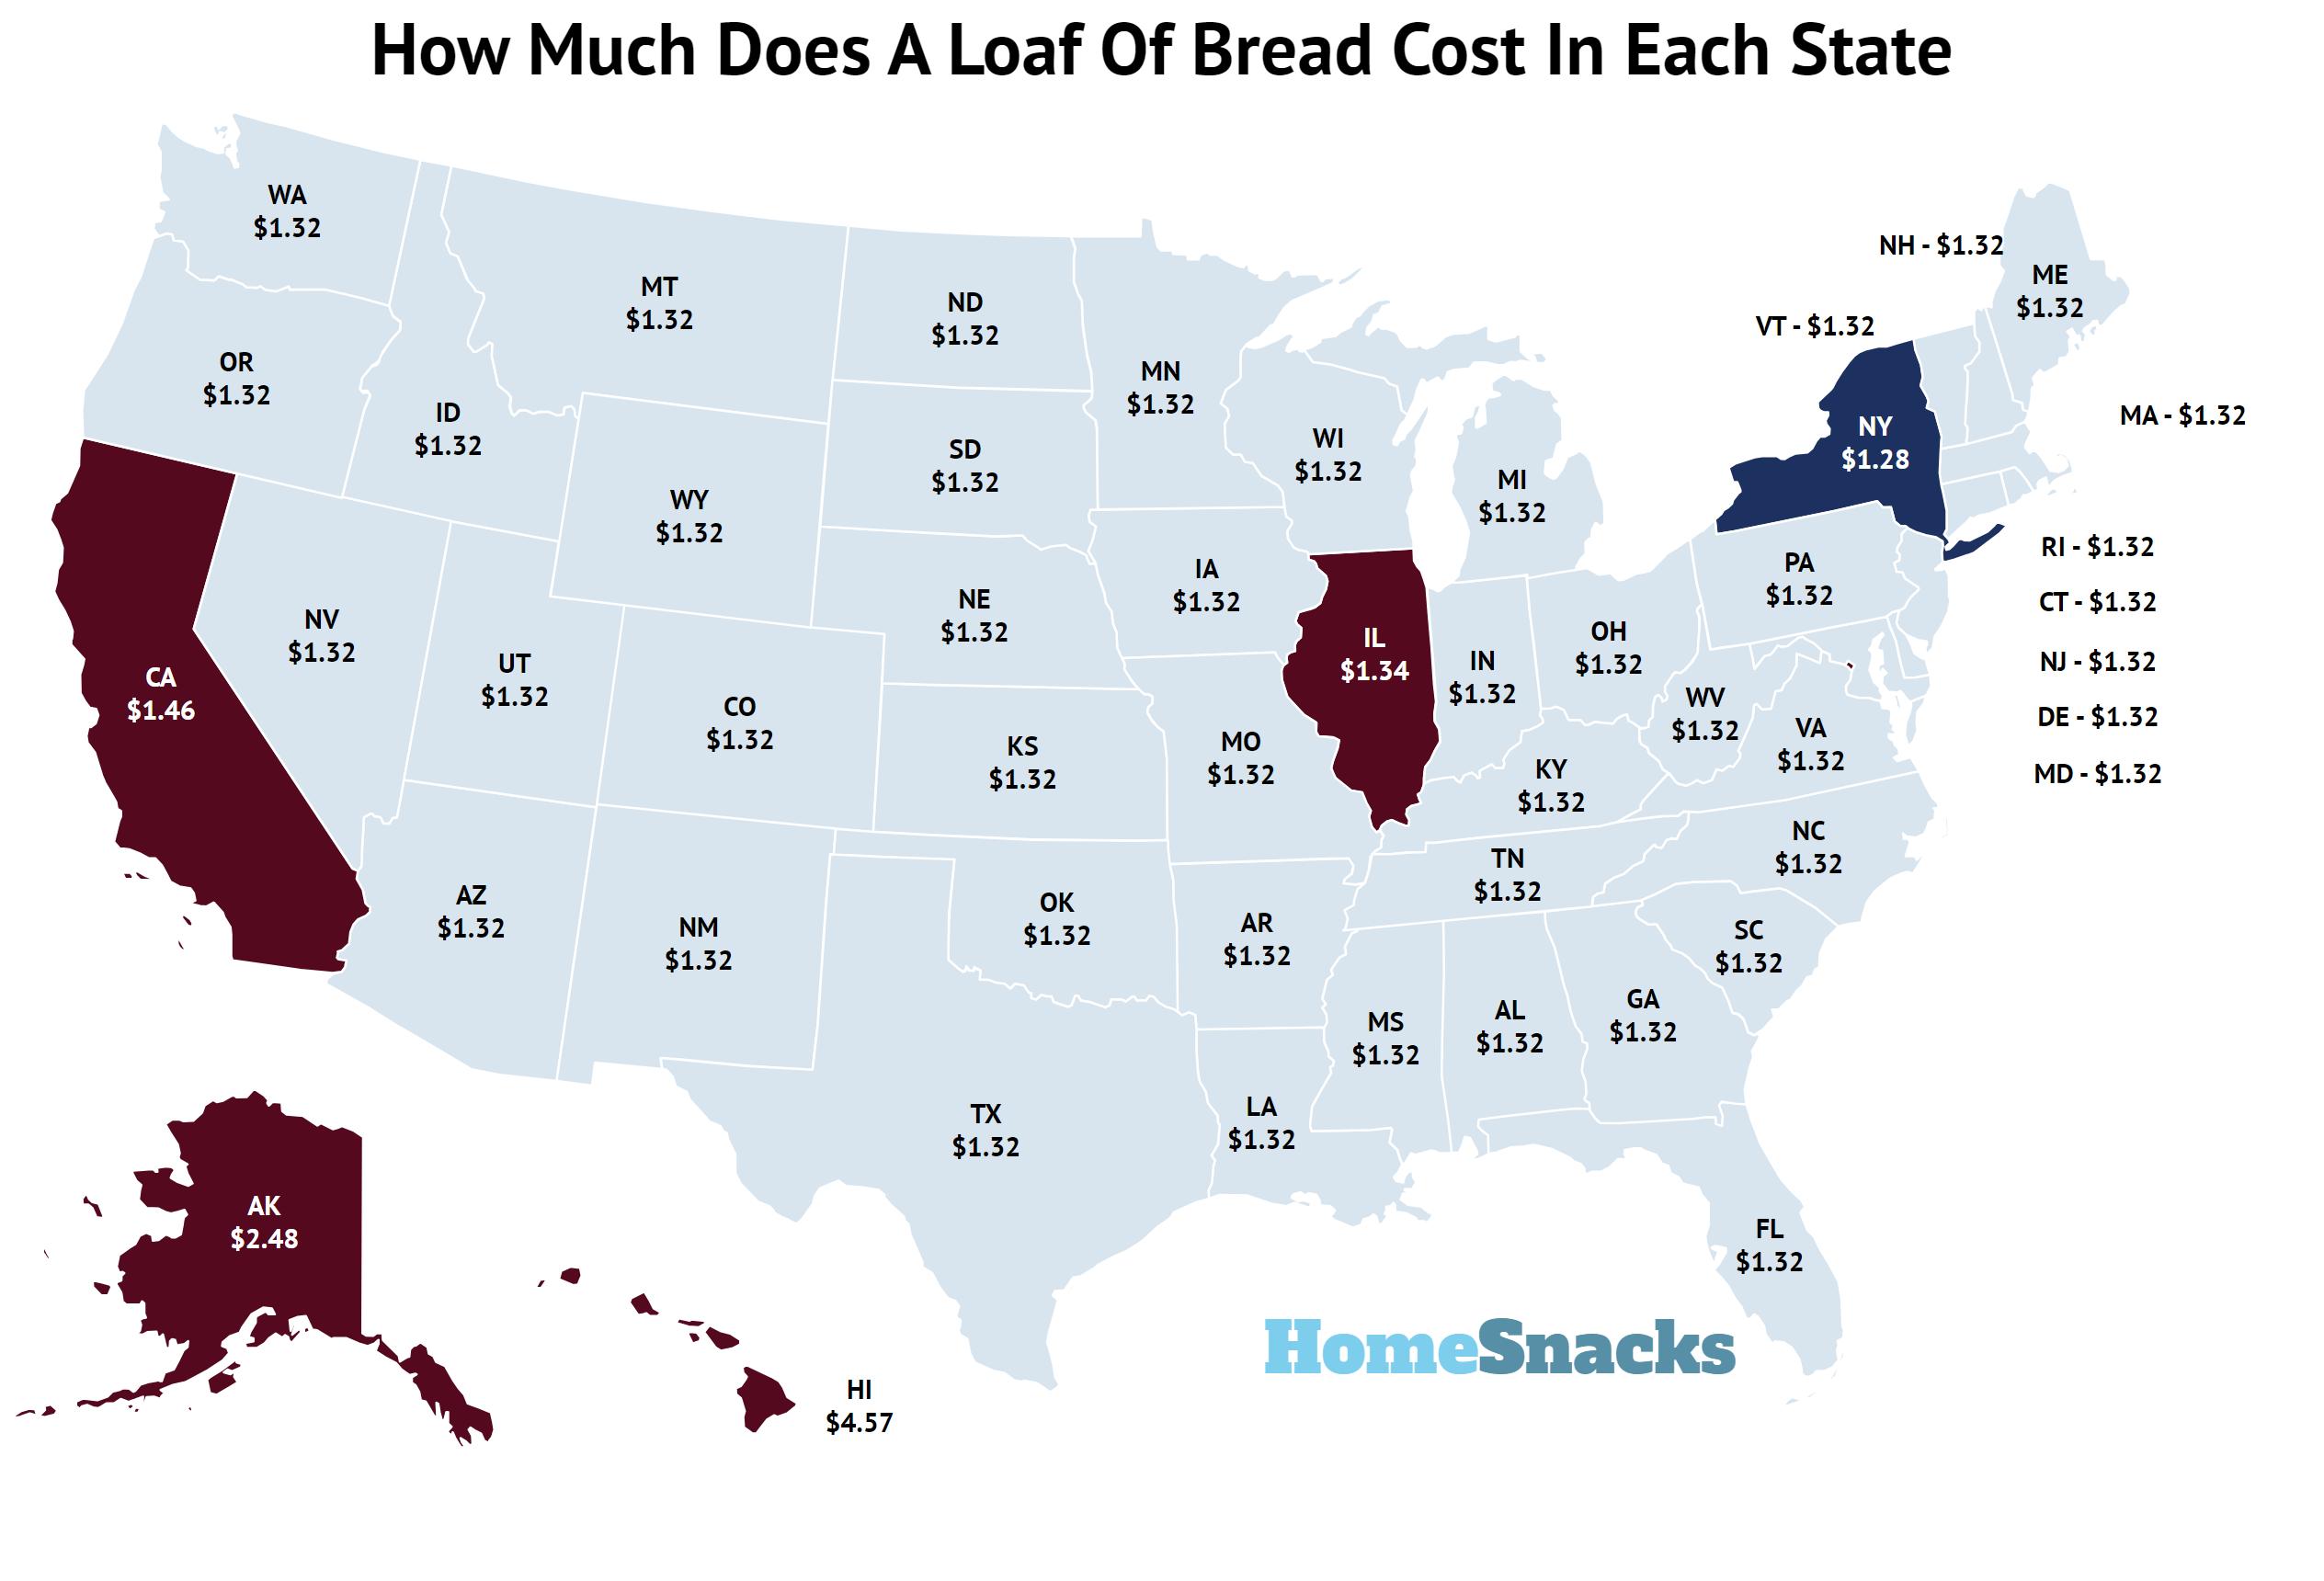 How Much Does A Loaf Of Bread Cost In Each State